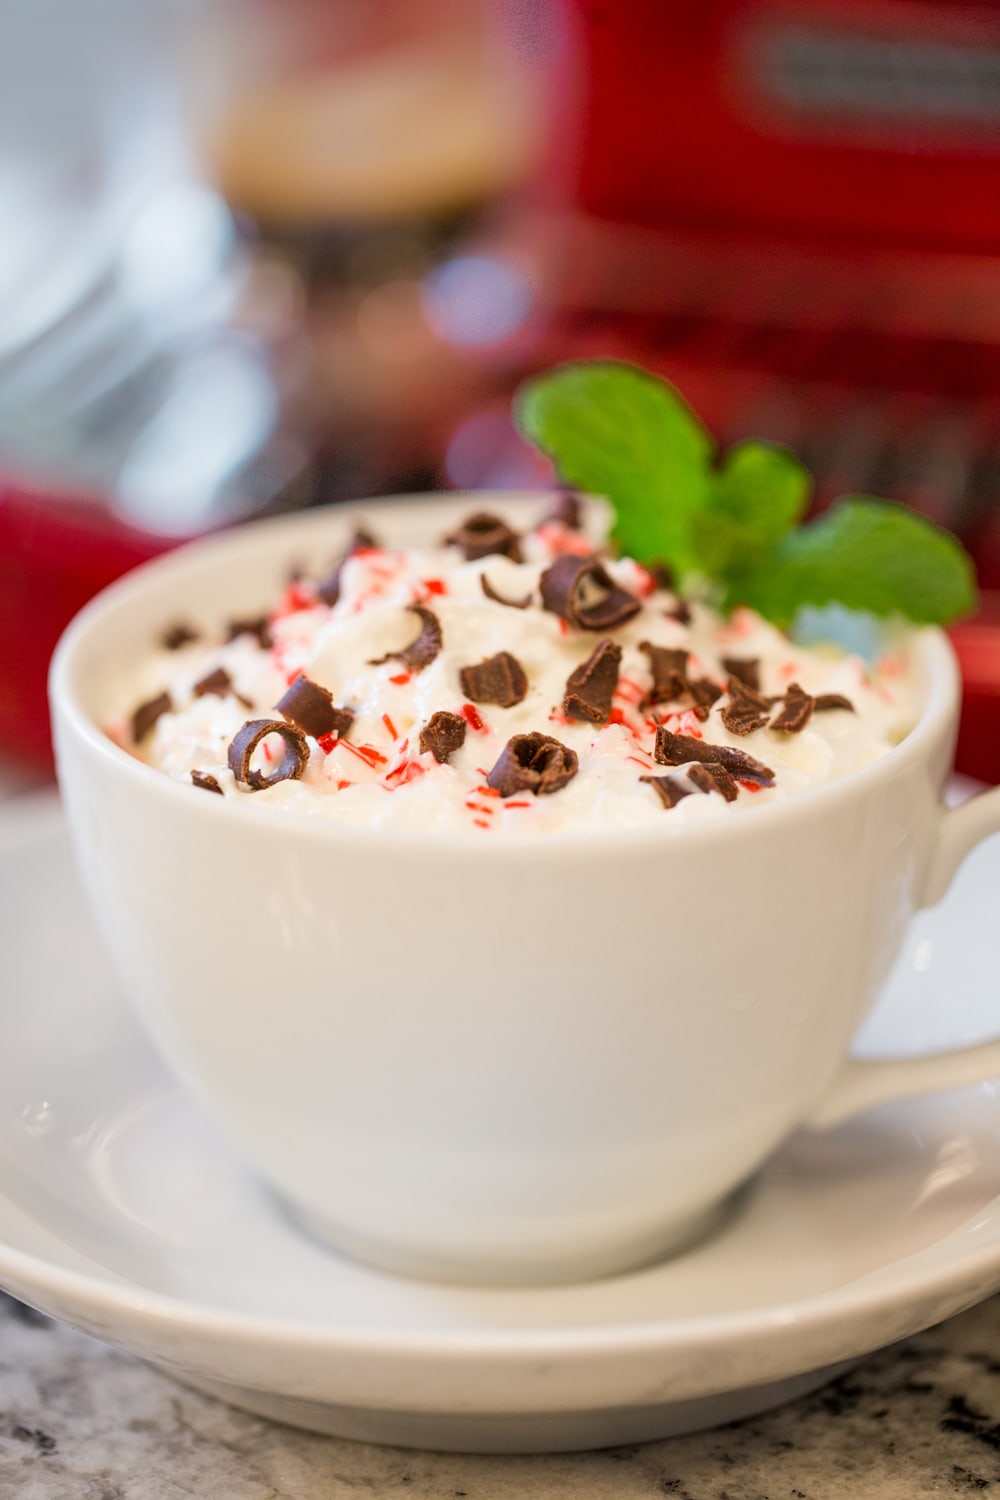 Copycat Starbucks Peppermint Mocha - love this delicious seasonal Starbucks drink? Save money and make your own! www.thecafesucrefarine.com